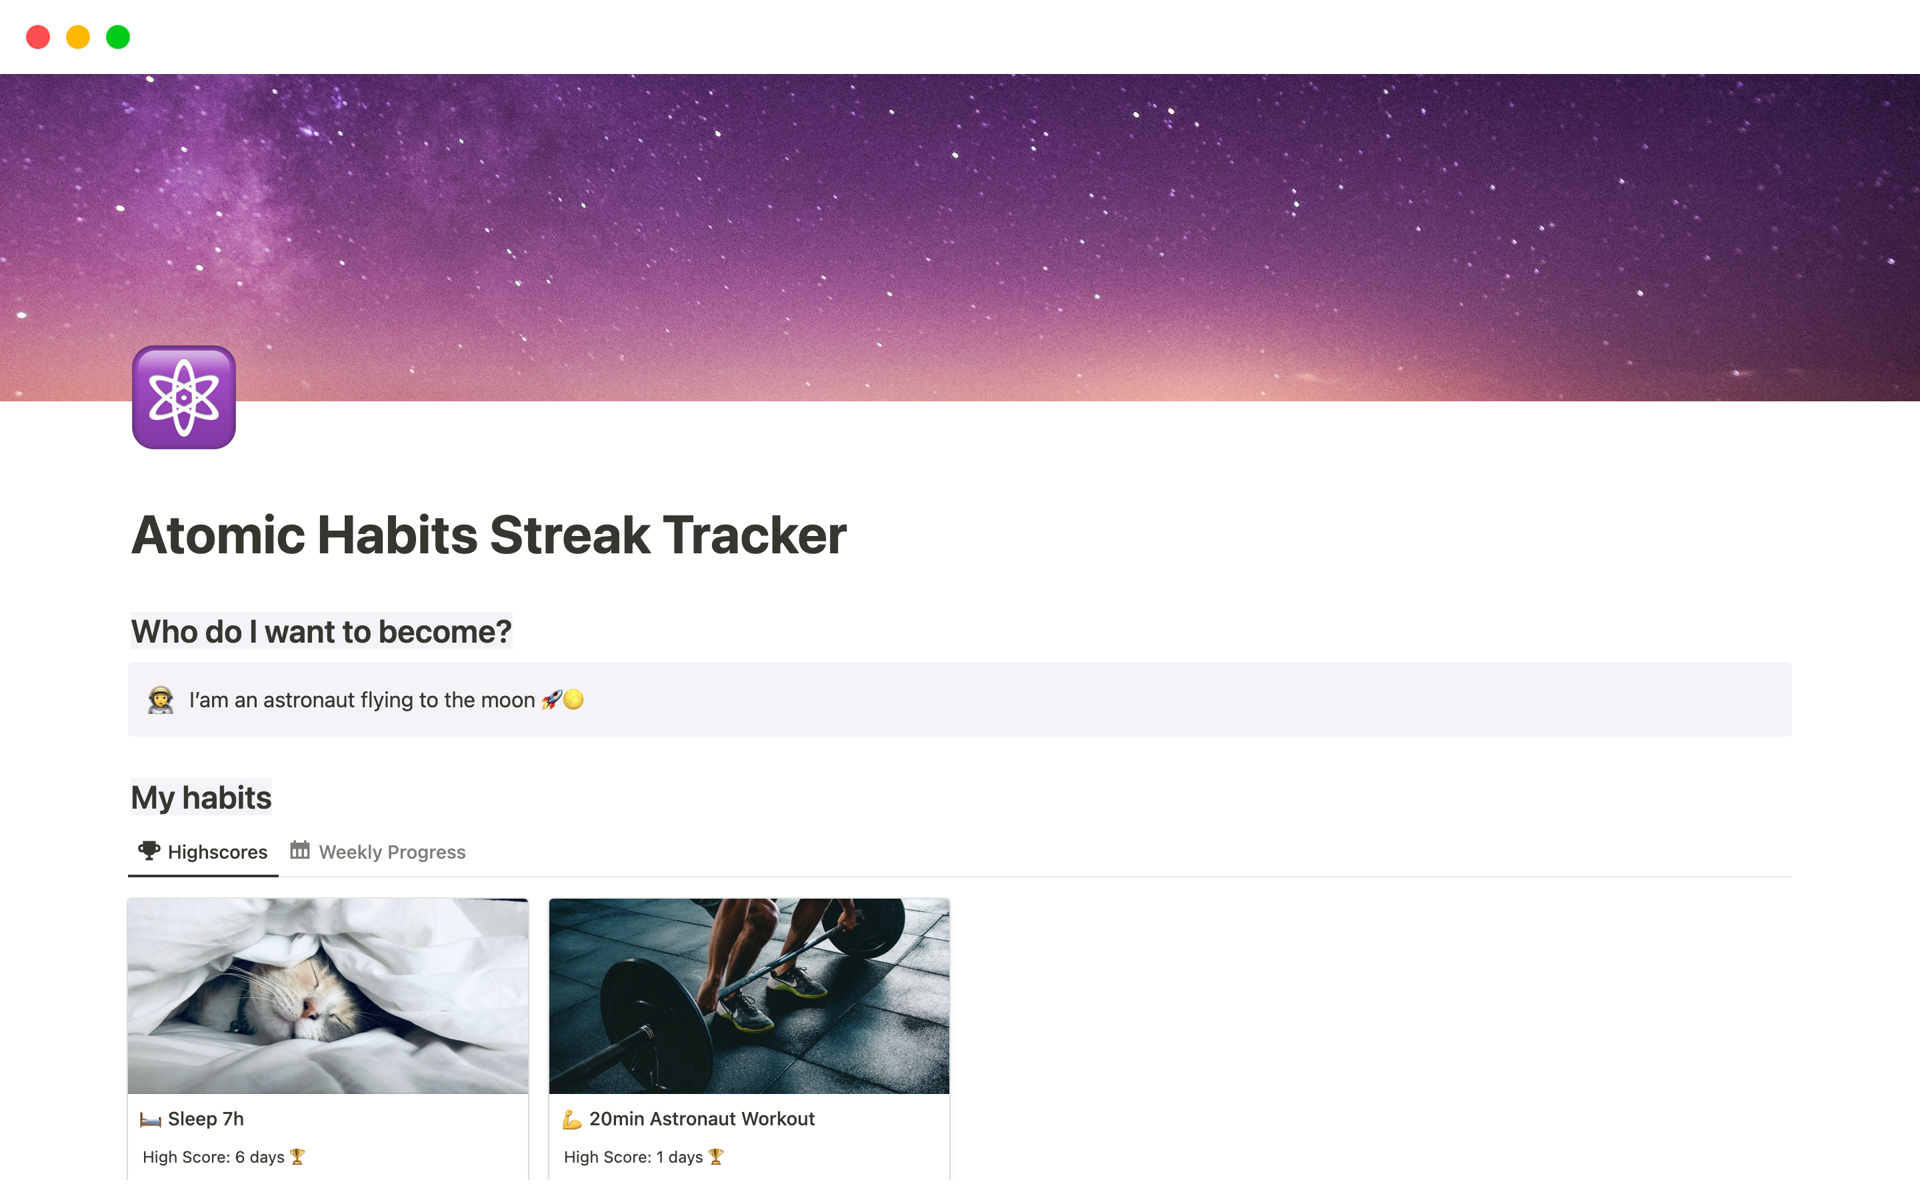 Whether you're a seasoned habit tracker or just getting started, this digital habit tracker is designed to keep you motivated and accountable on your journey.